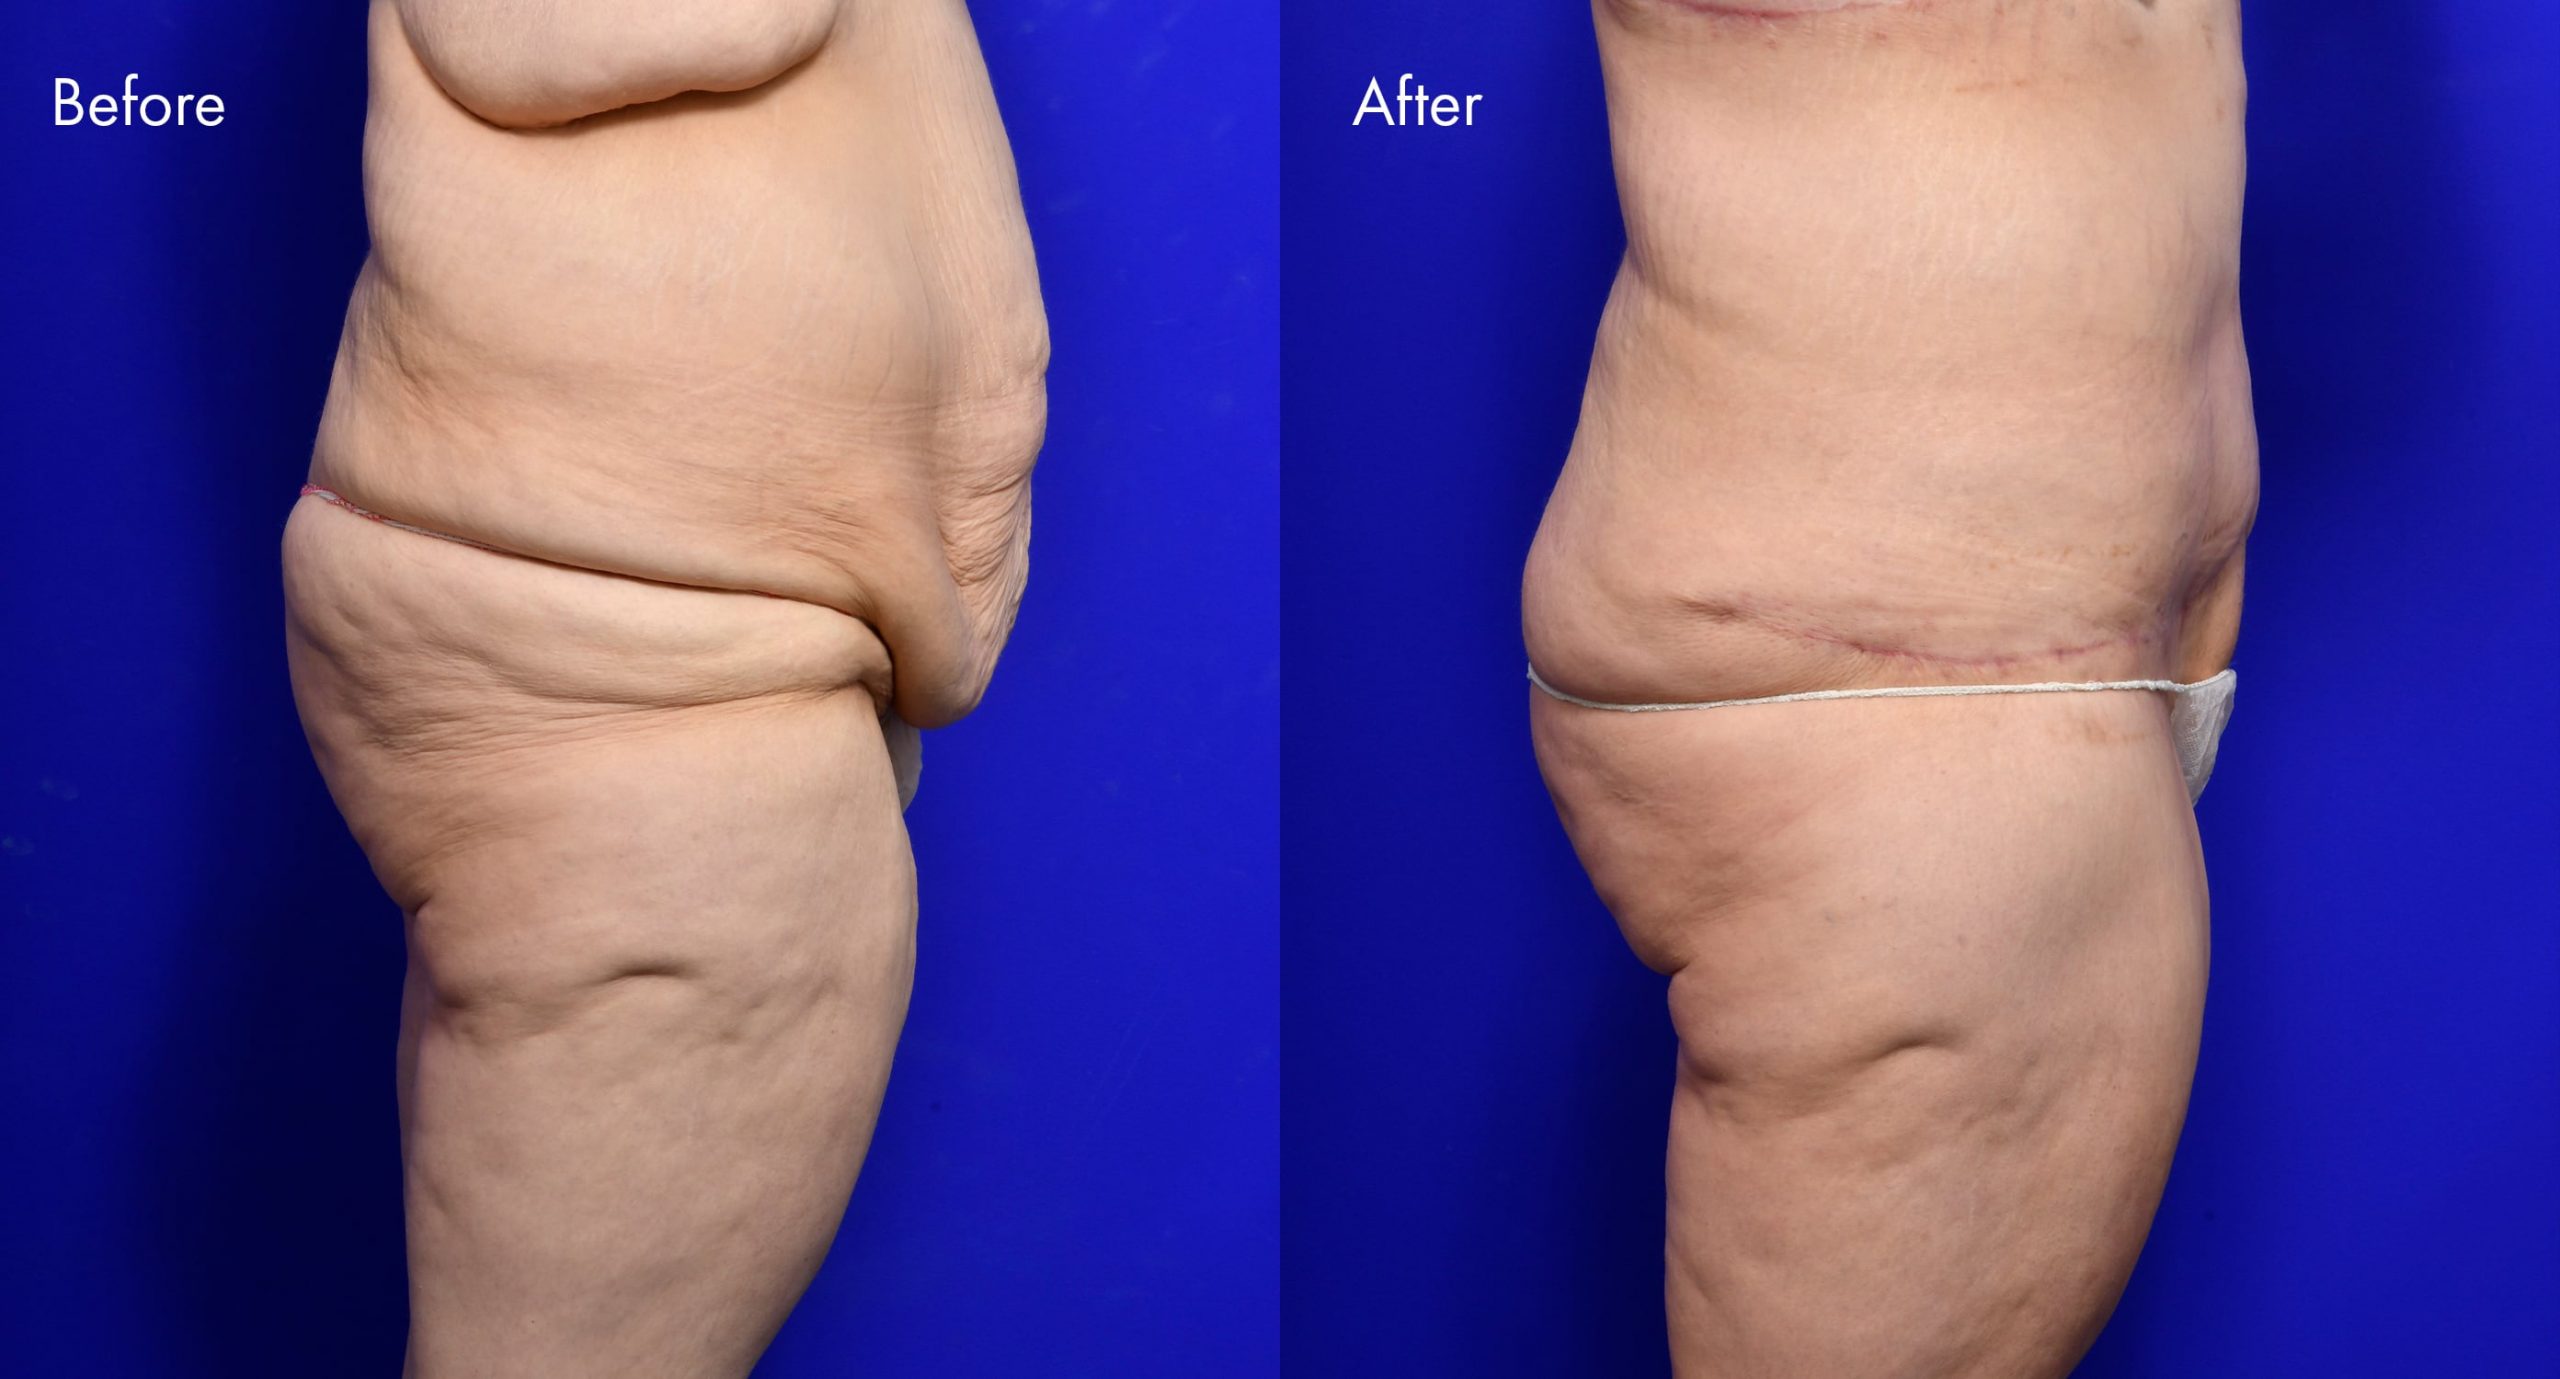 Tummy Tuck (Abdominoplasty) Before and After | 2